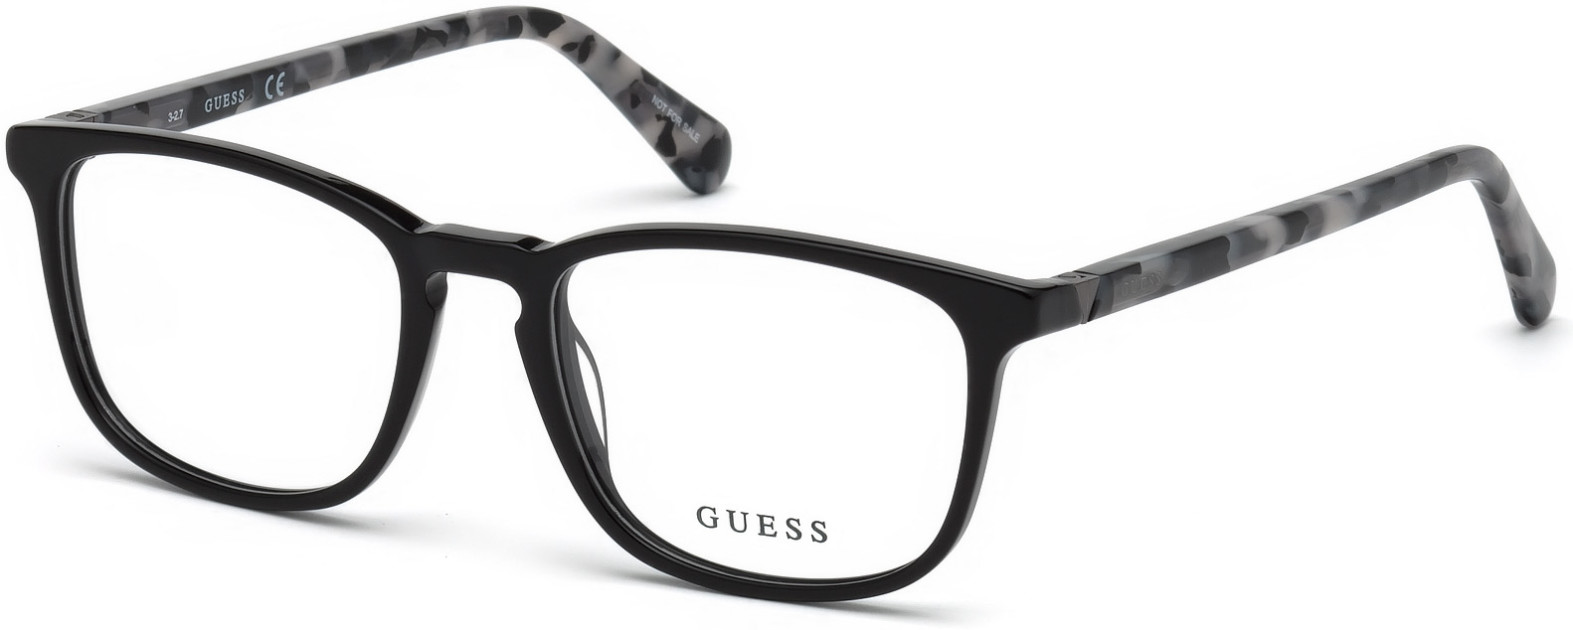 GUESS 1950